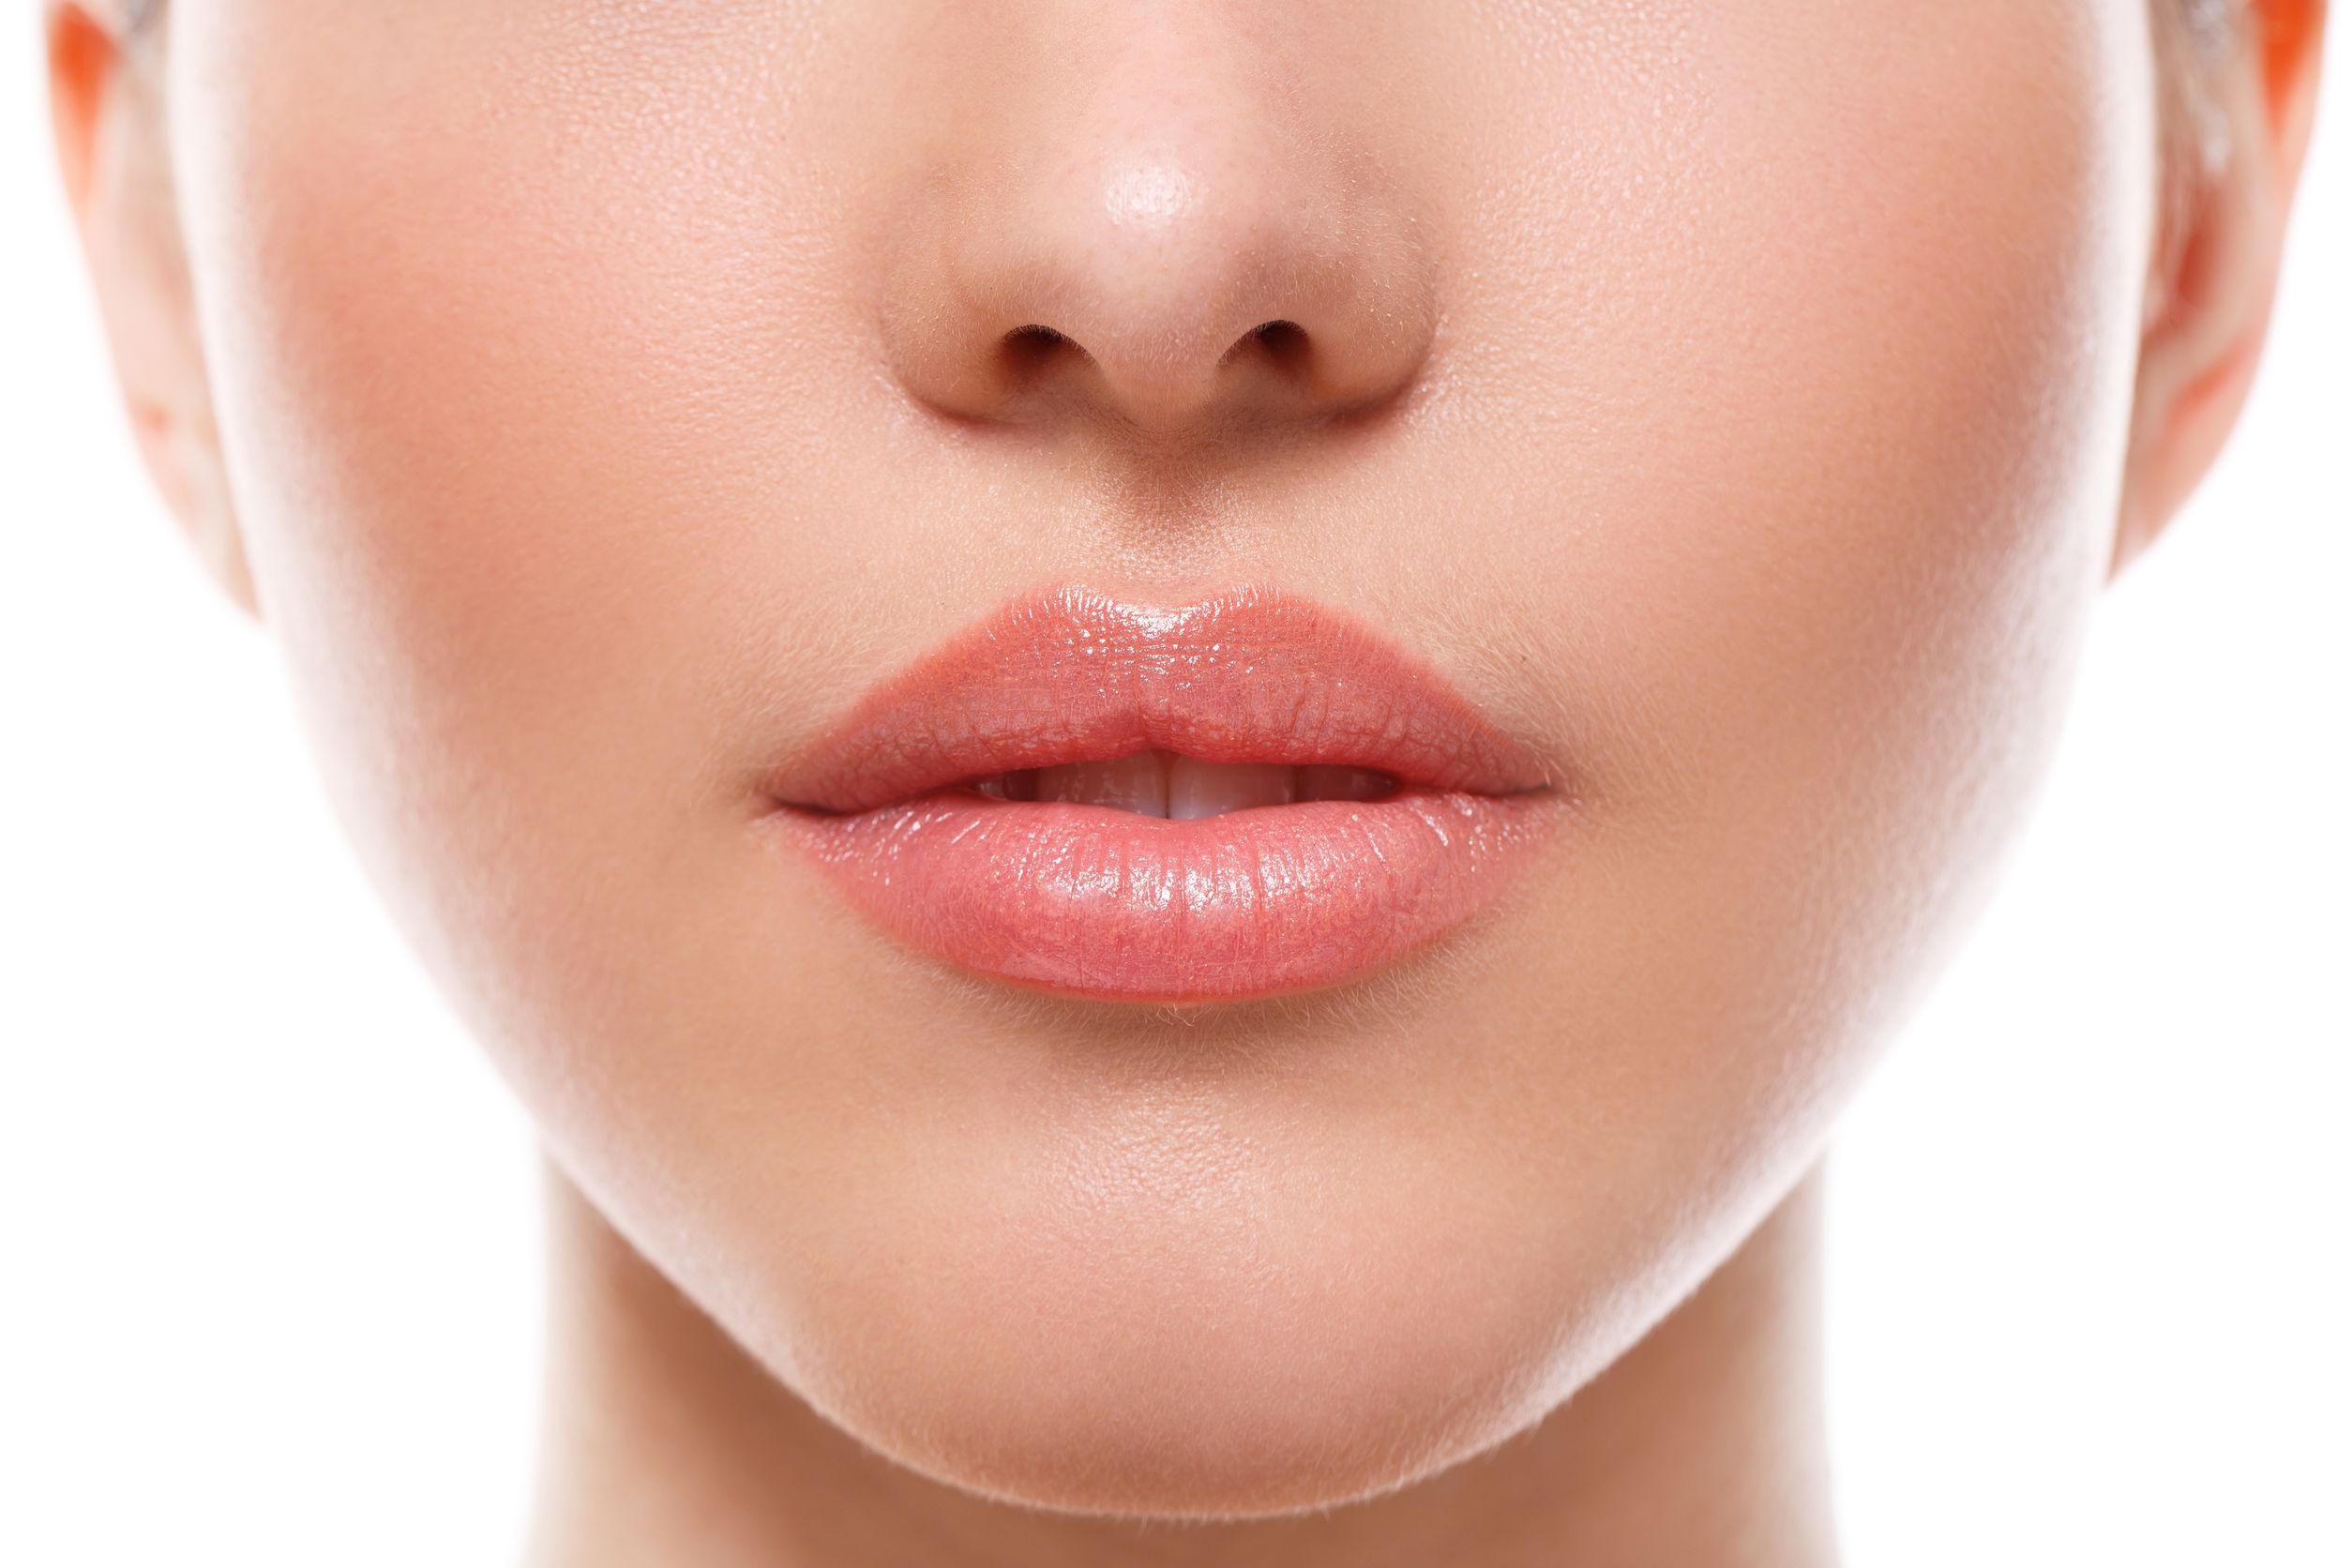 What To Do About Upper Lip Volume Loss While Aging! - Finger & Associates  Plastic Surgery Center